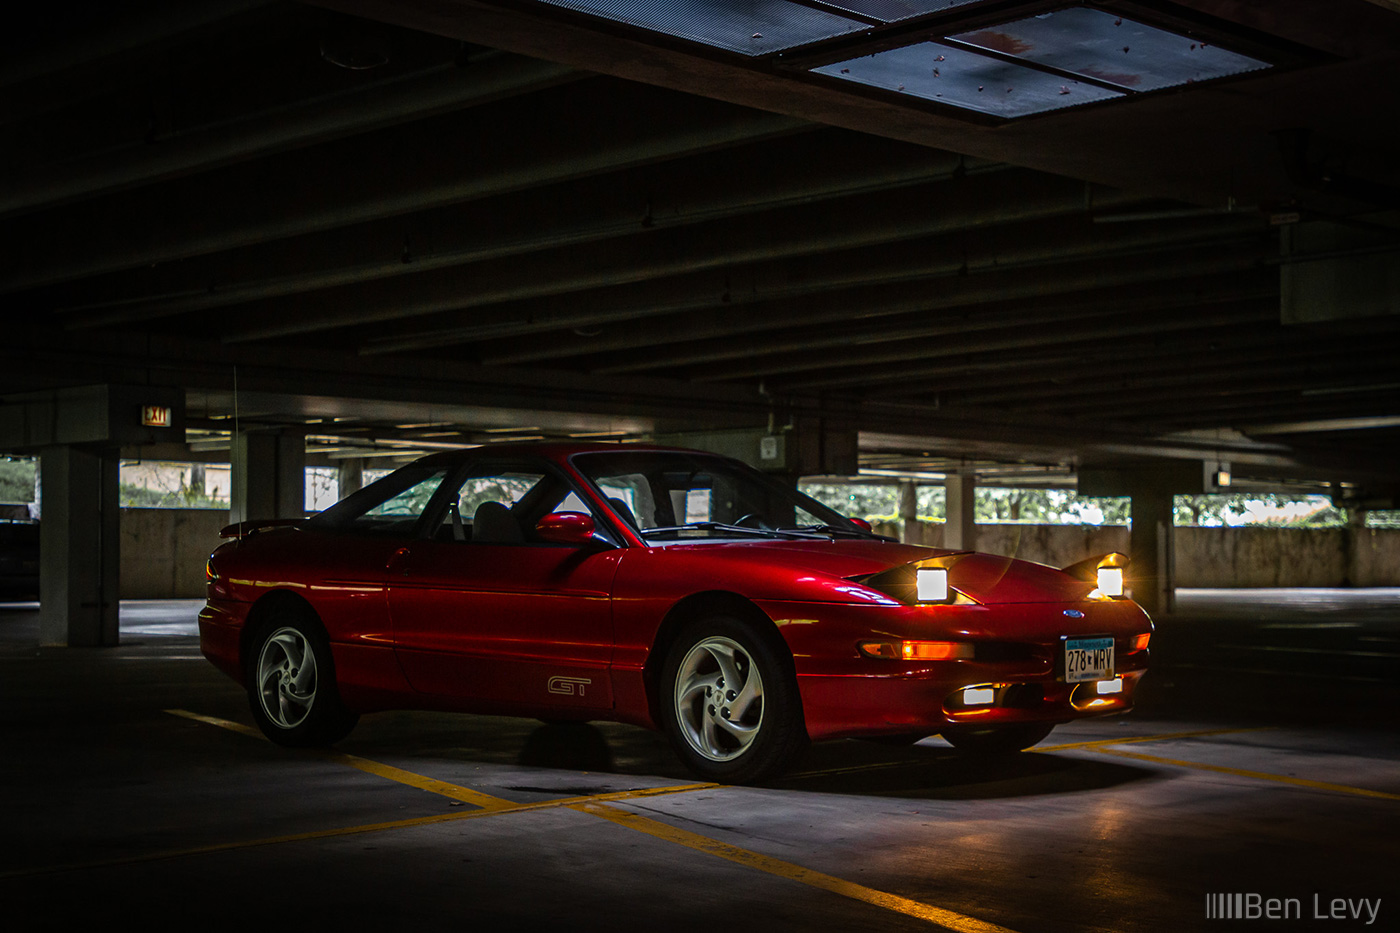 Red Ford Probe GT in a Parking Garage